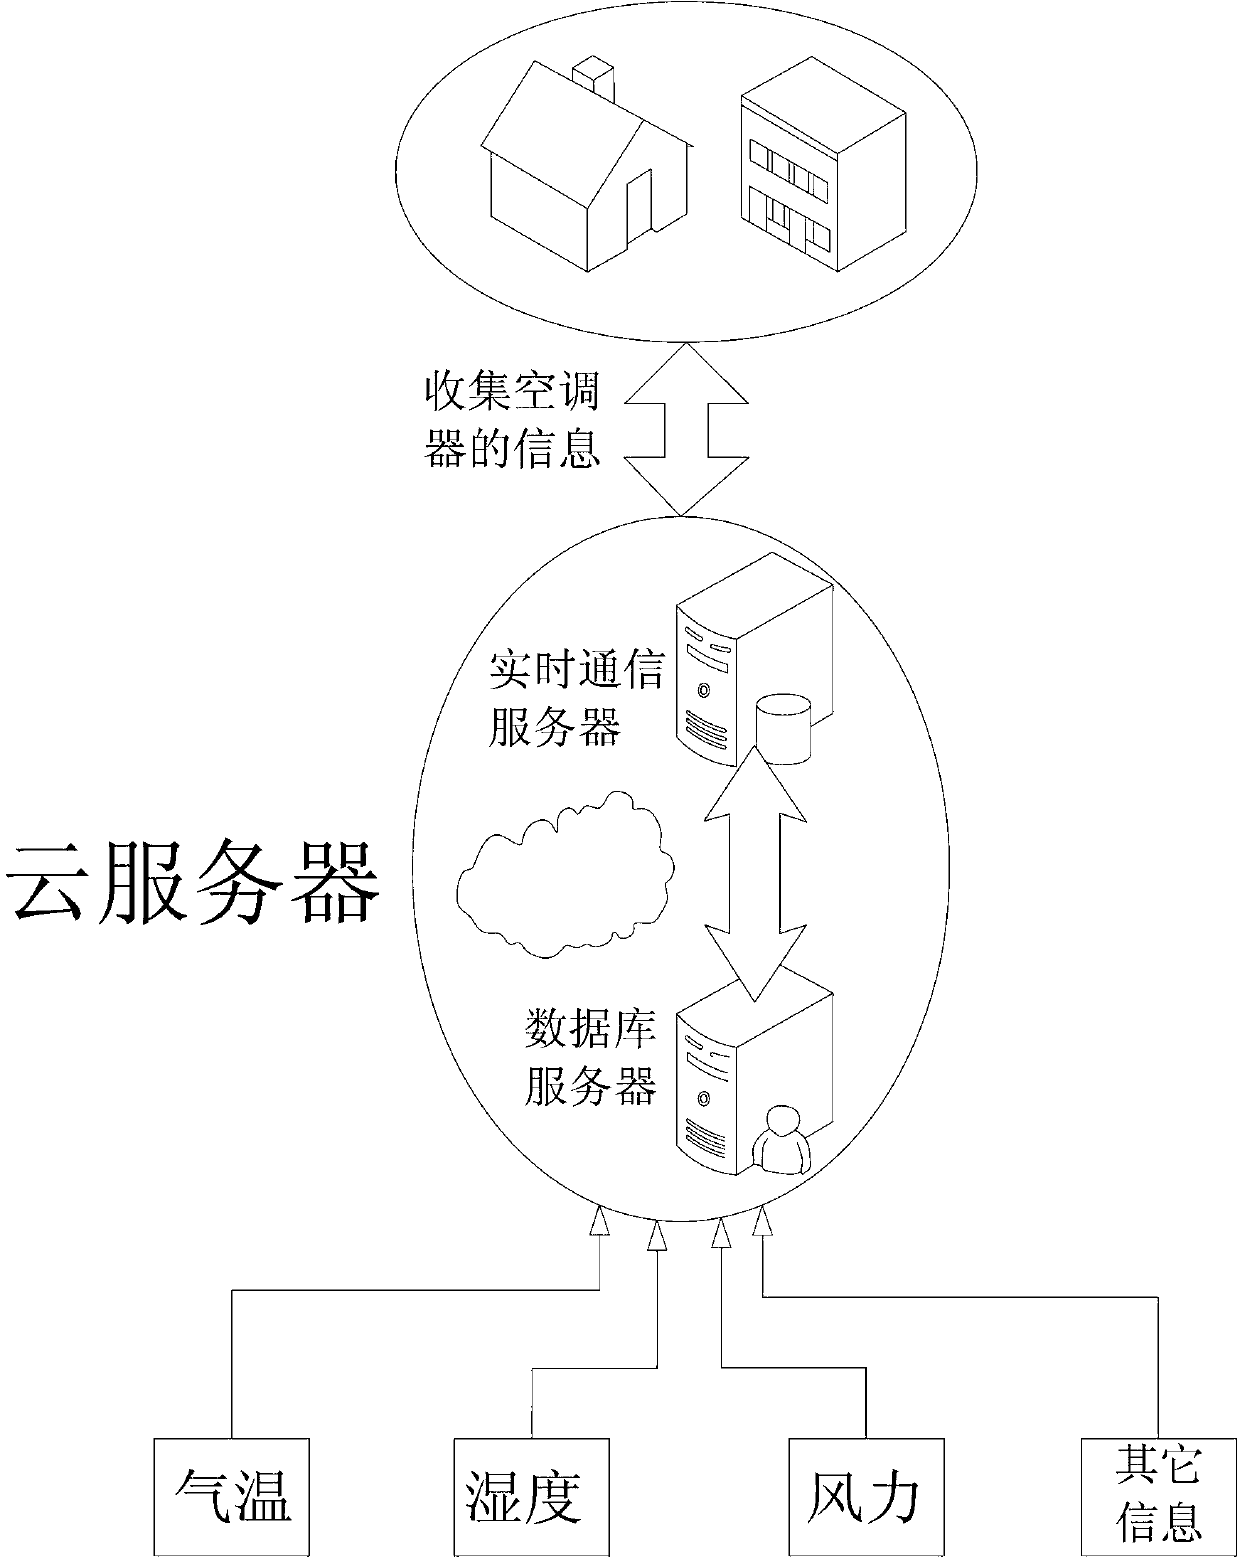 Air conditioner sleeping function control method based on cloud computing technology